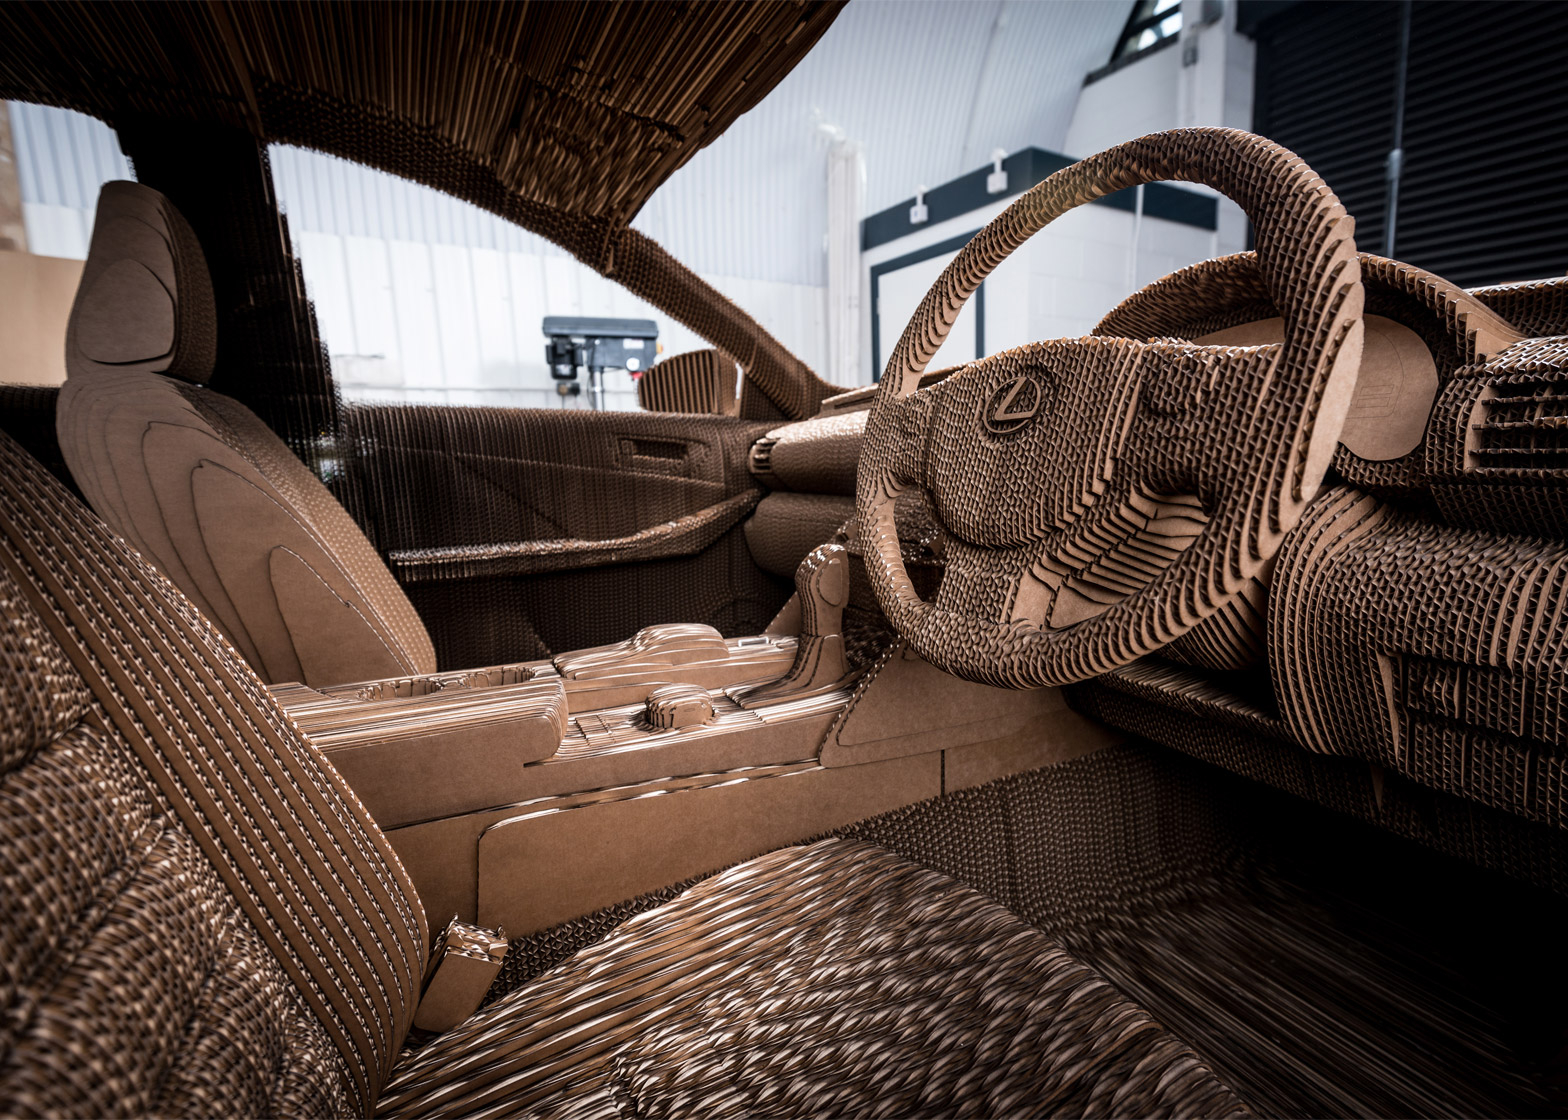 Car Origami 3D Lexus Reveals Fully Drivable Origami Inspired Cardboard Car